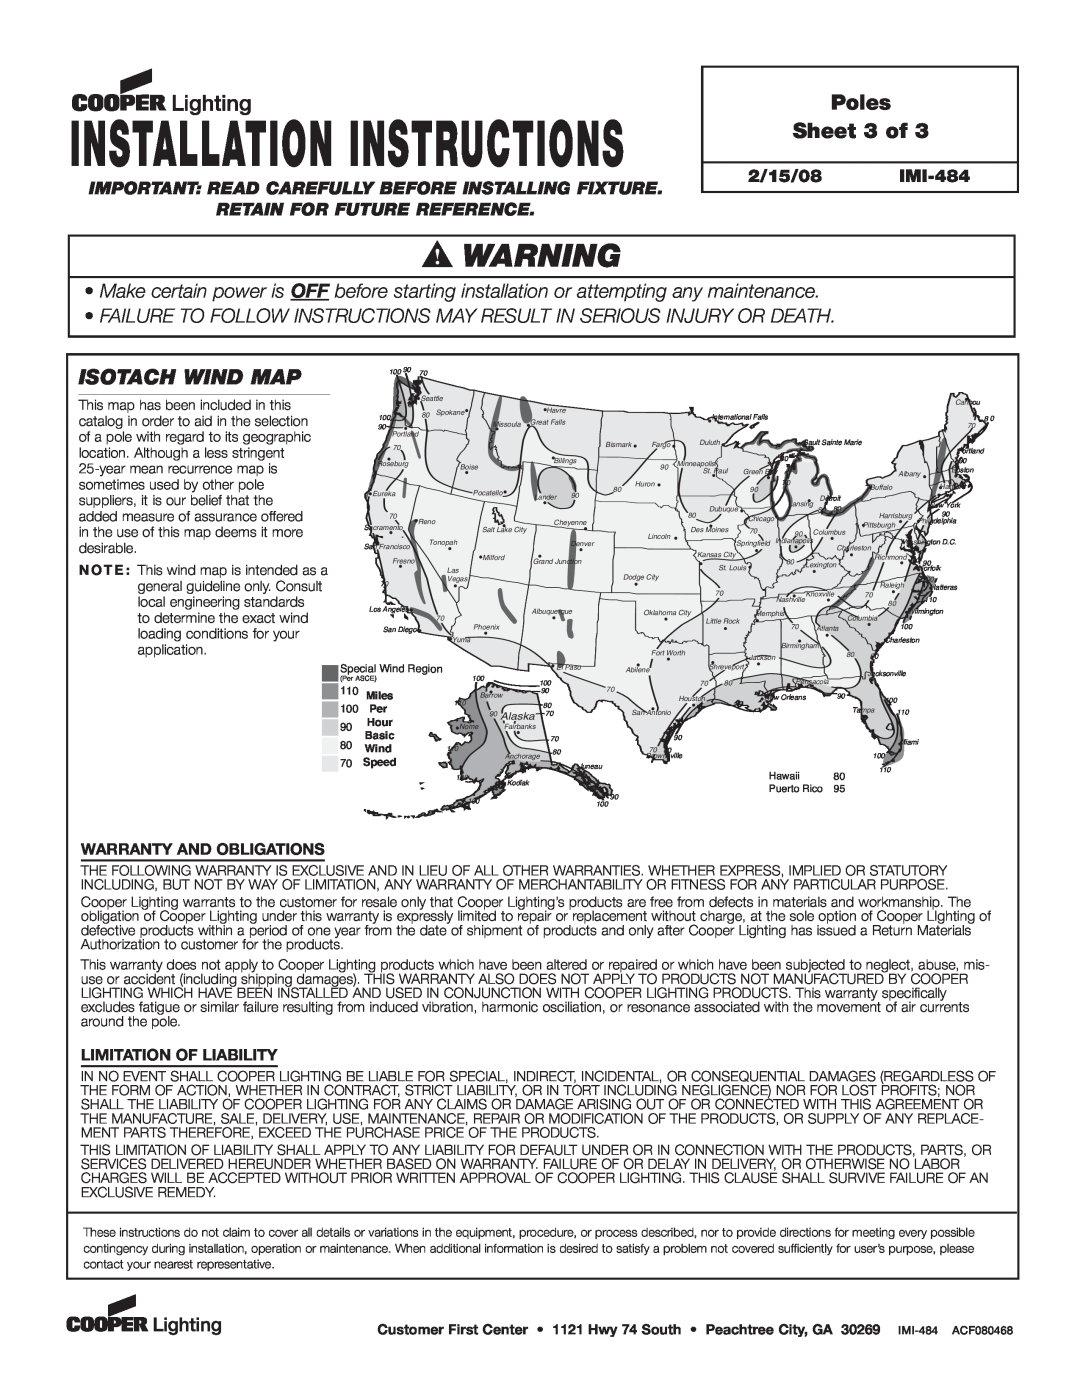 Cooper Lighting IMI-484 dimensions Poles Sheet 3 of, Installation Instructions, Isotach Wind Map 